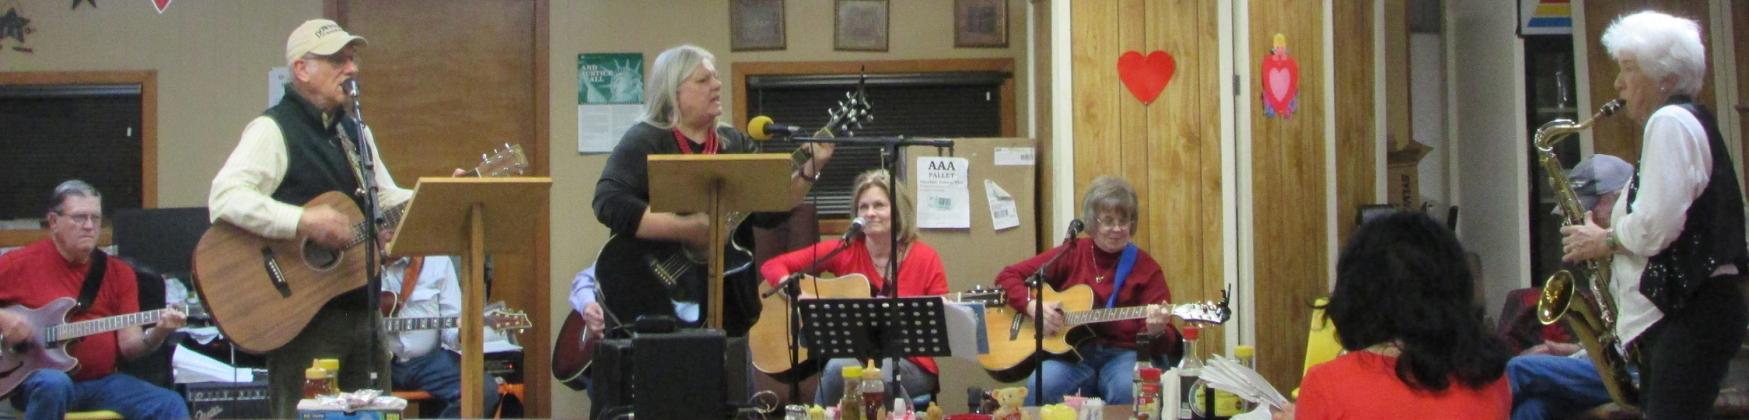 MONTHLY MUSIC Monthly music night at the Aging Center in Knox City | DON THOMPSON PHOTO